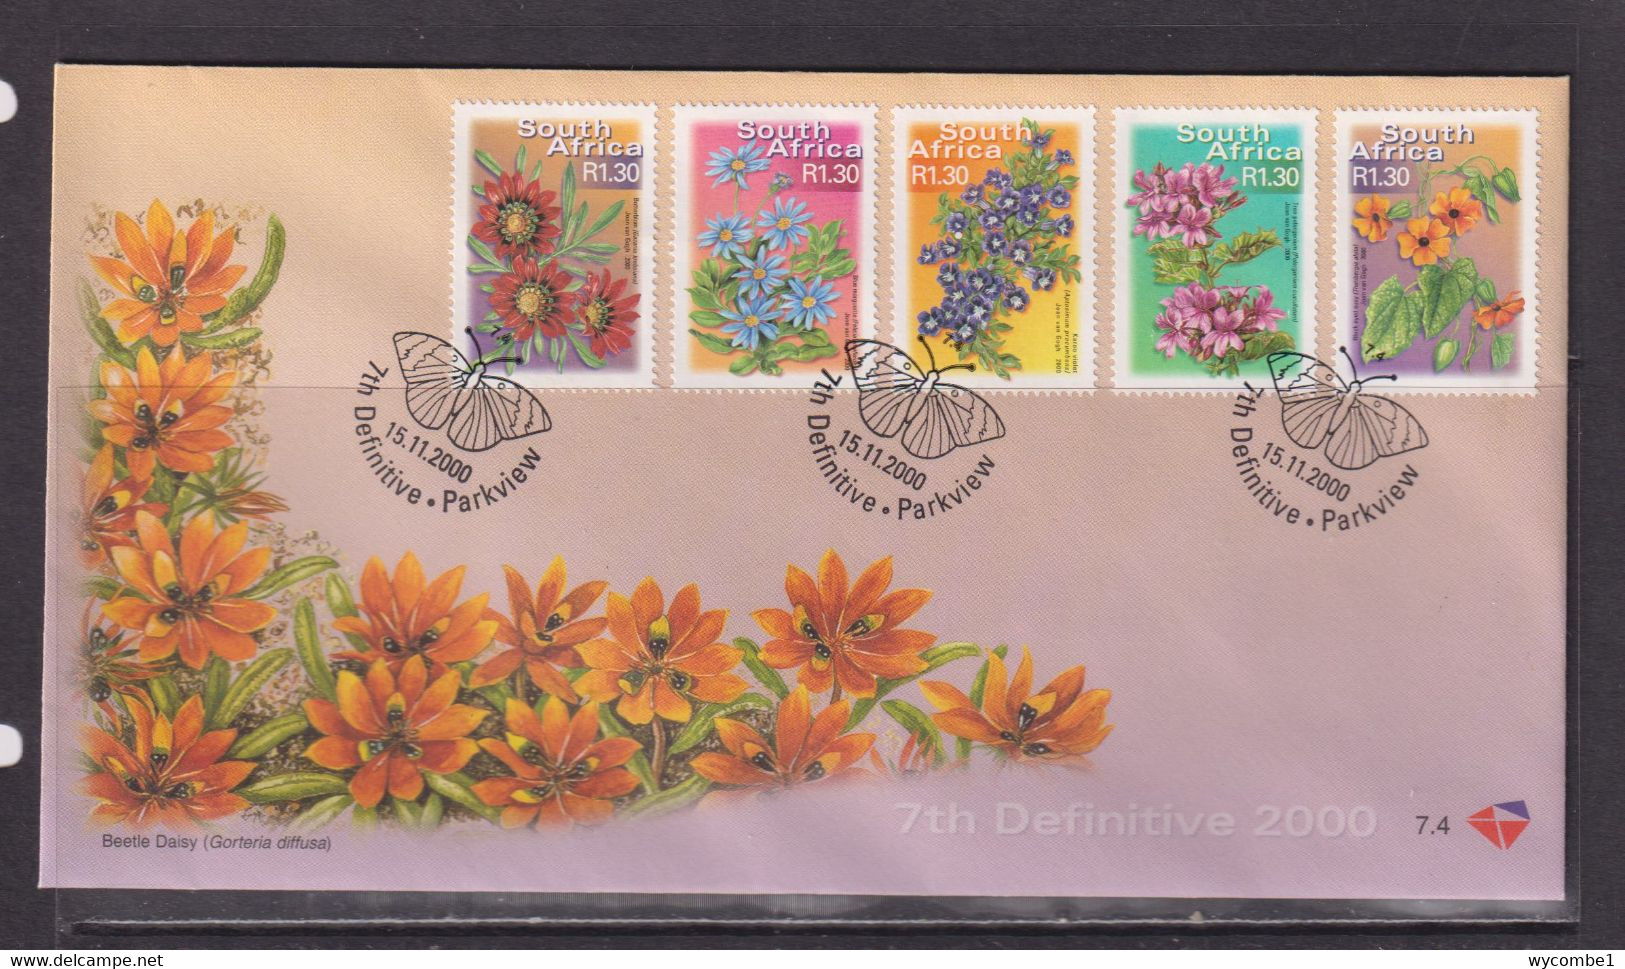 SOUTH AFRICA - 2000 Flowers 1r30 Definitive FDC - Covers & Documents